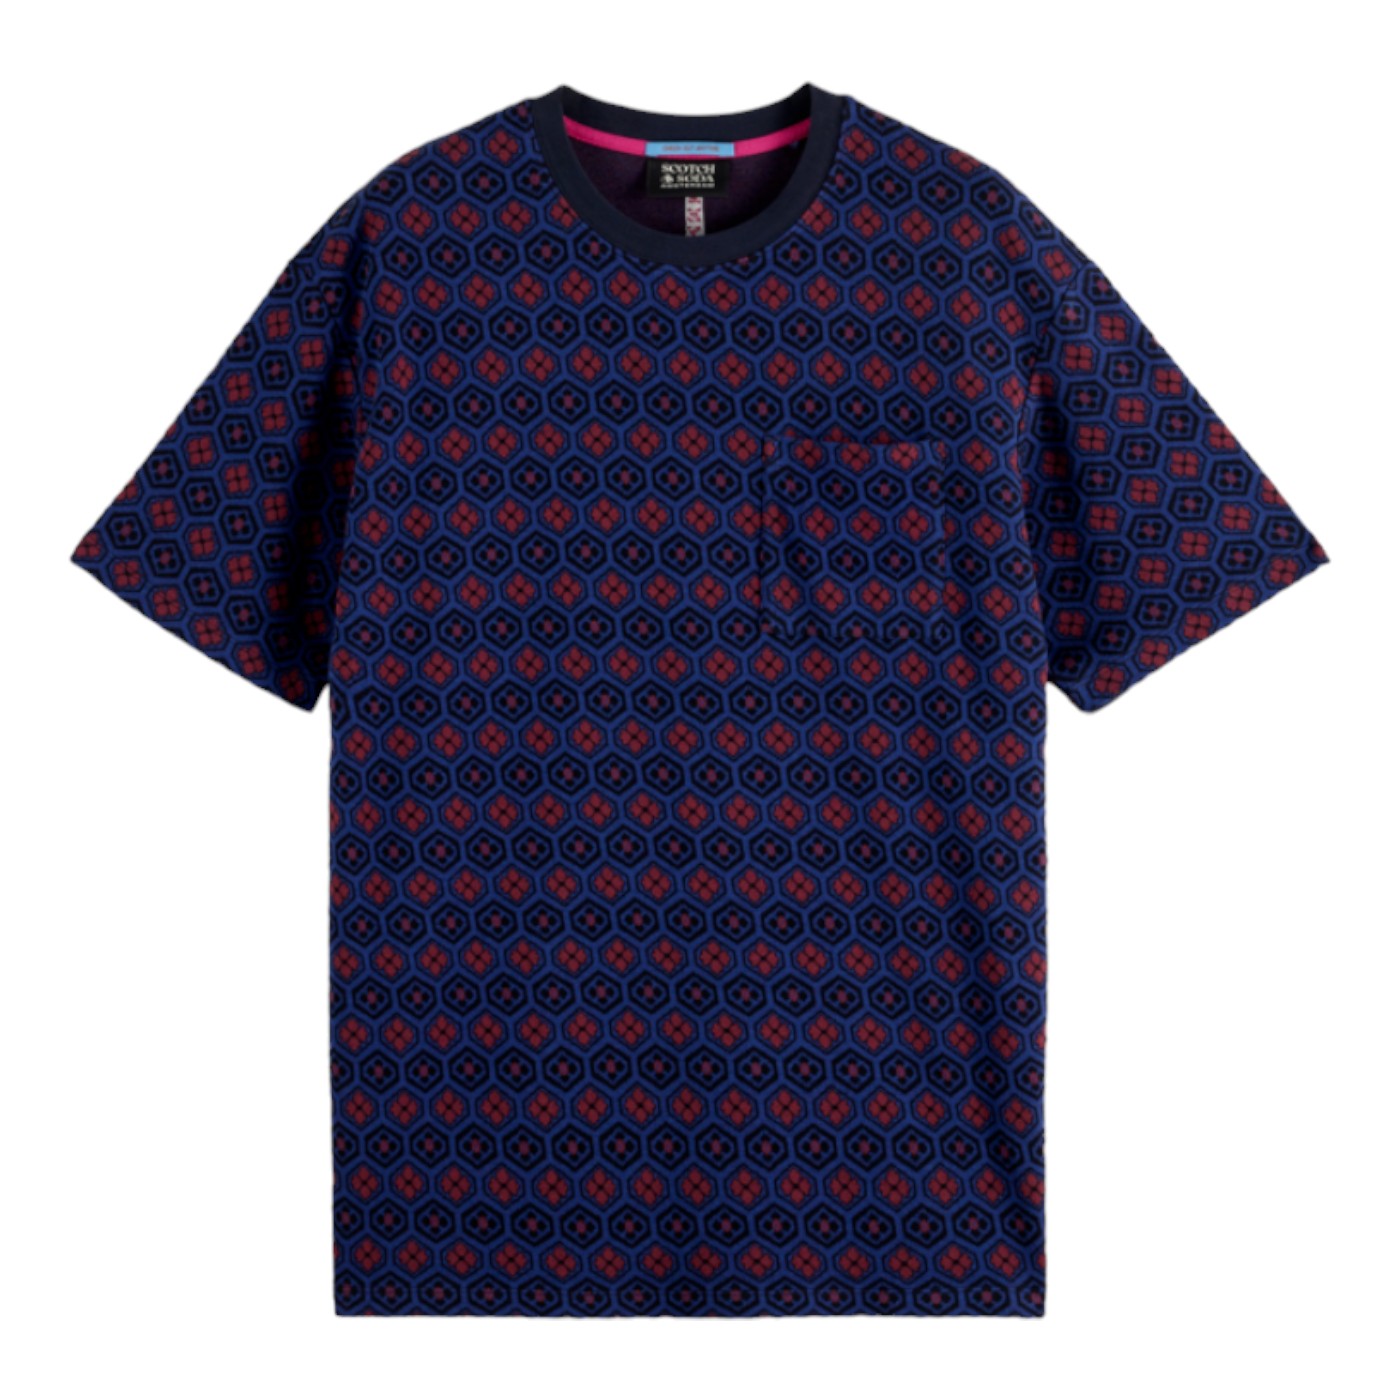 Dark blue and red patterned tee shirt